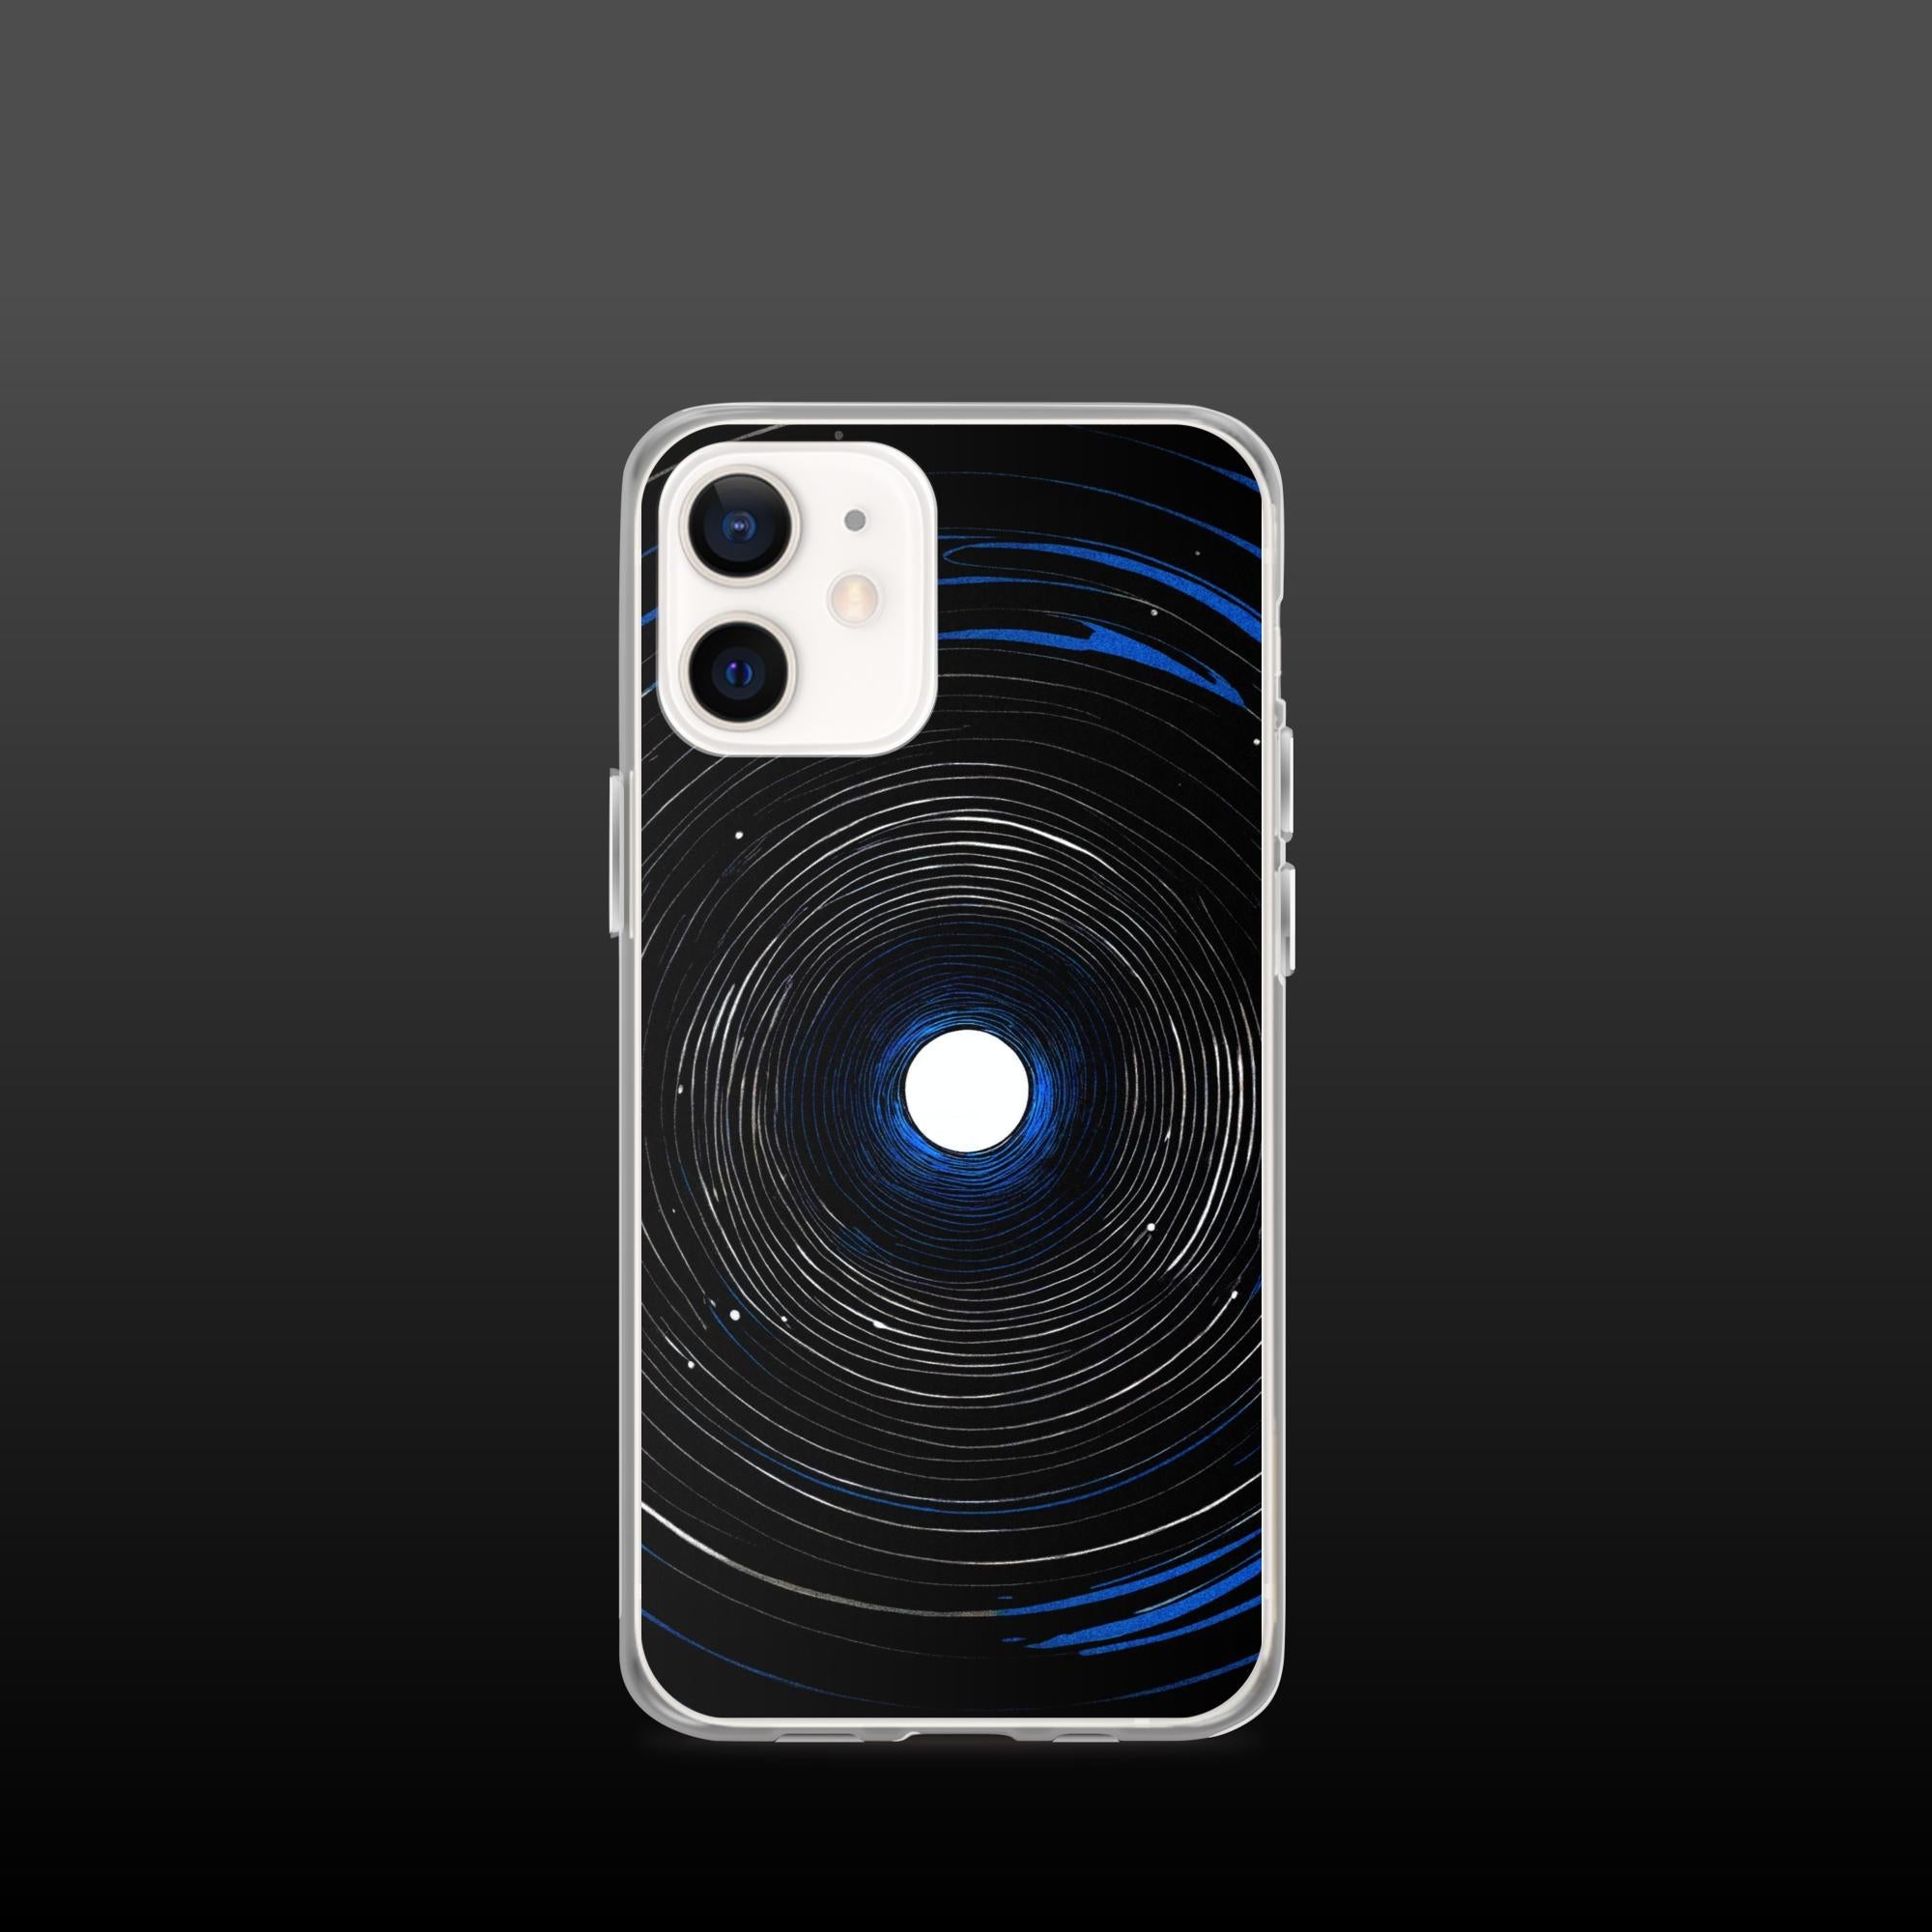 "Azure vortex" clear iphone case - Clear iphone case - Ever colorful